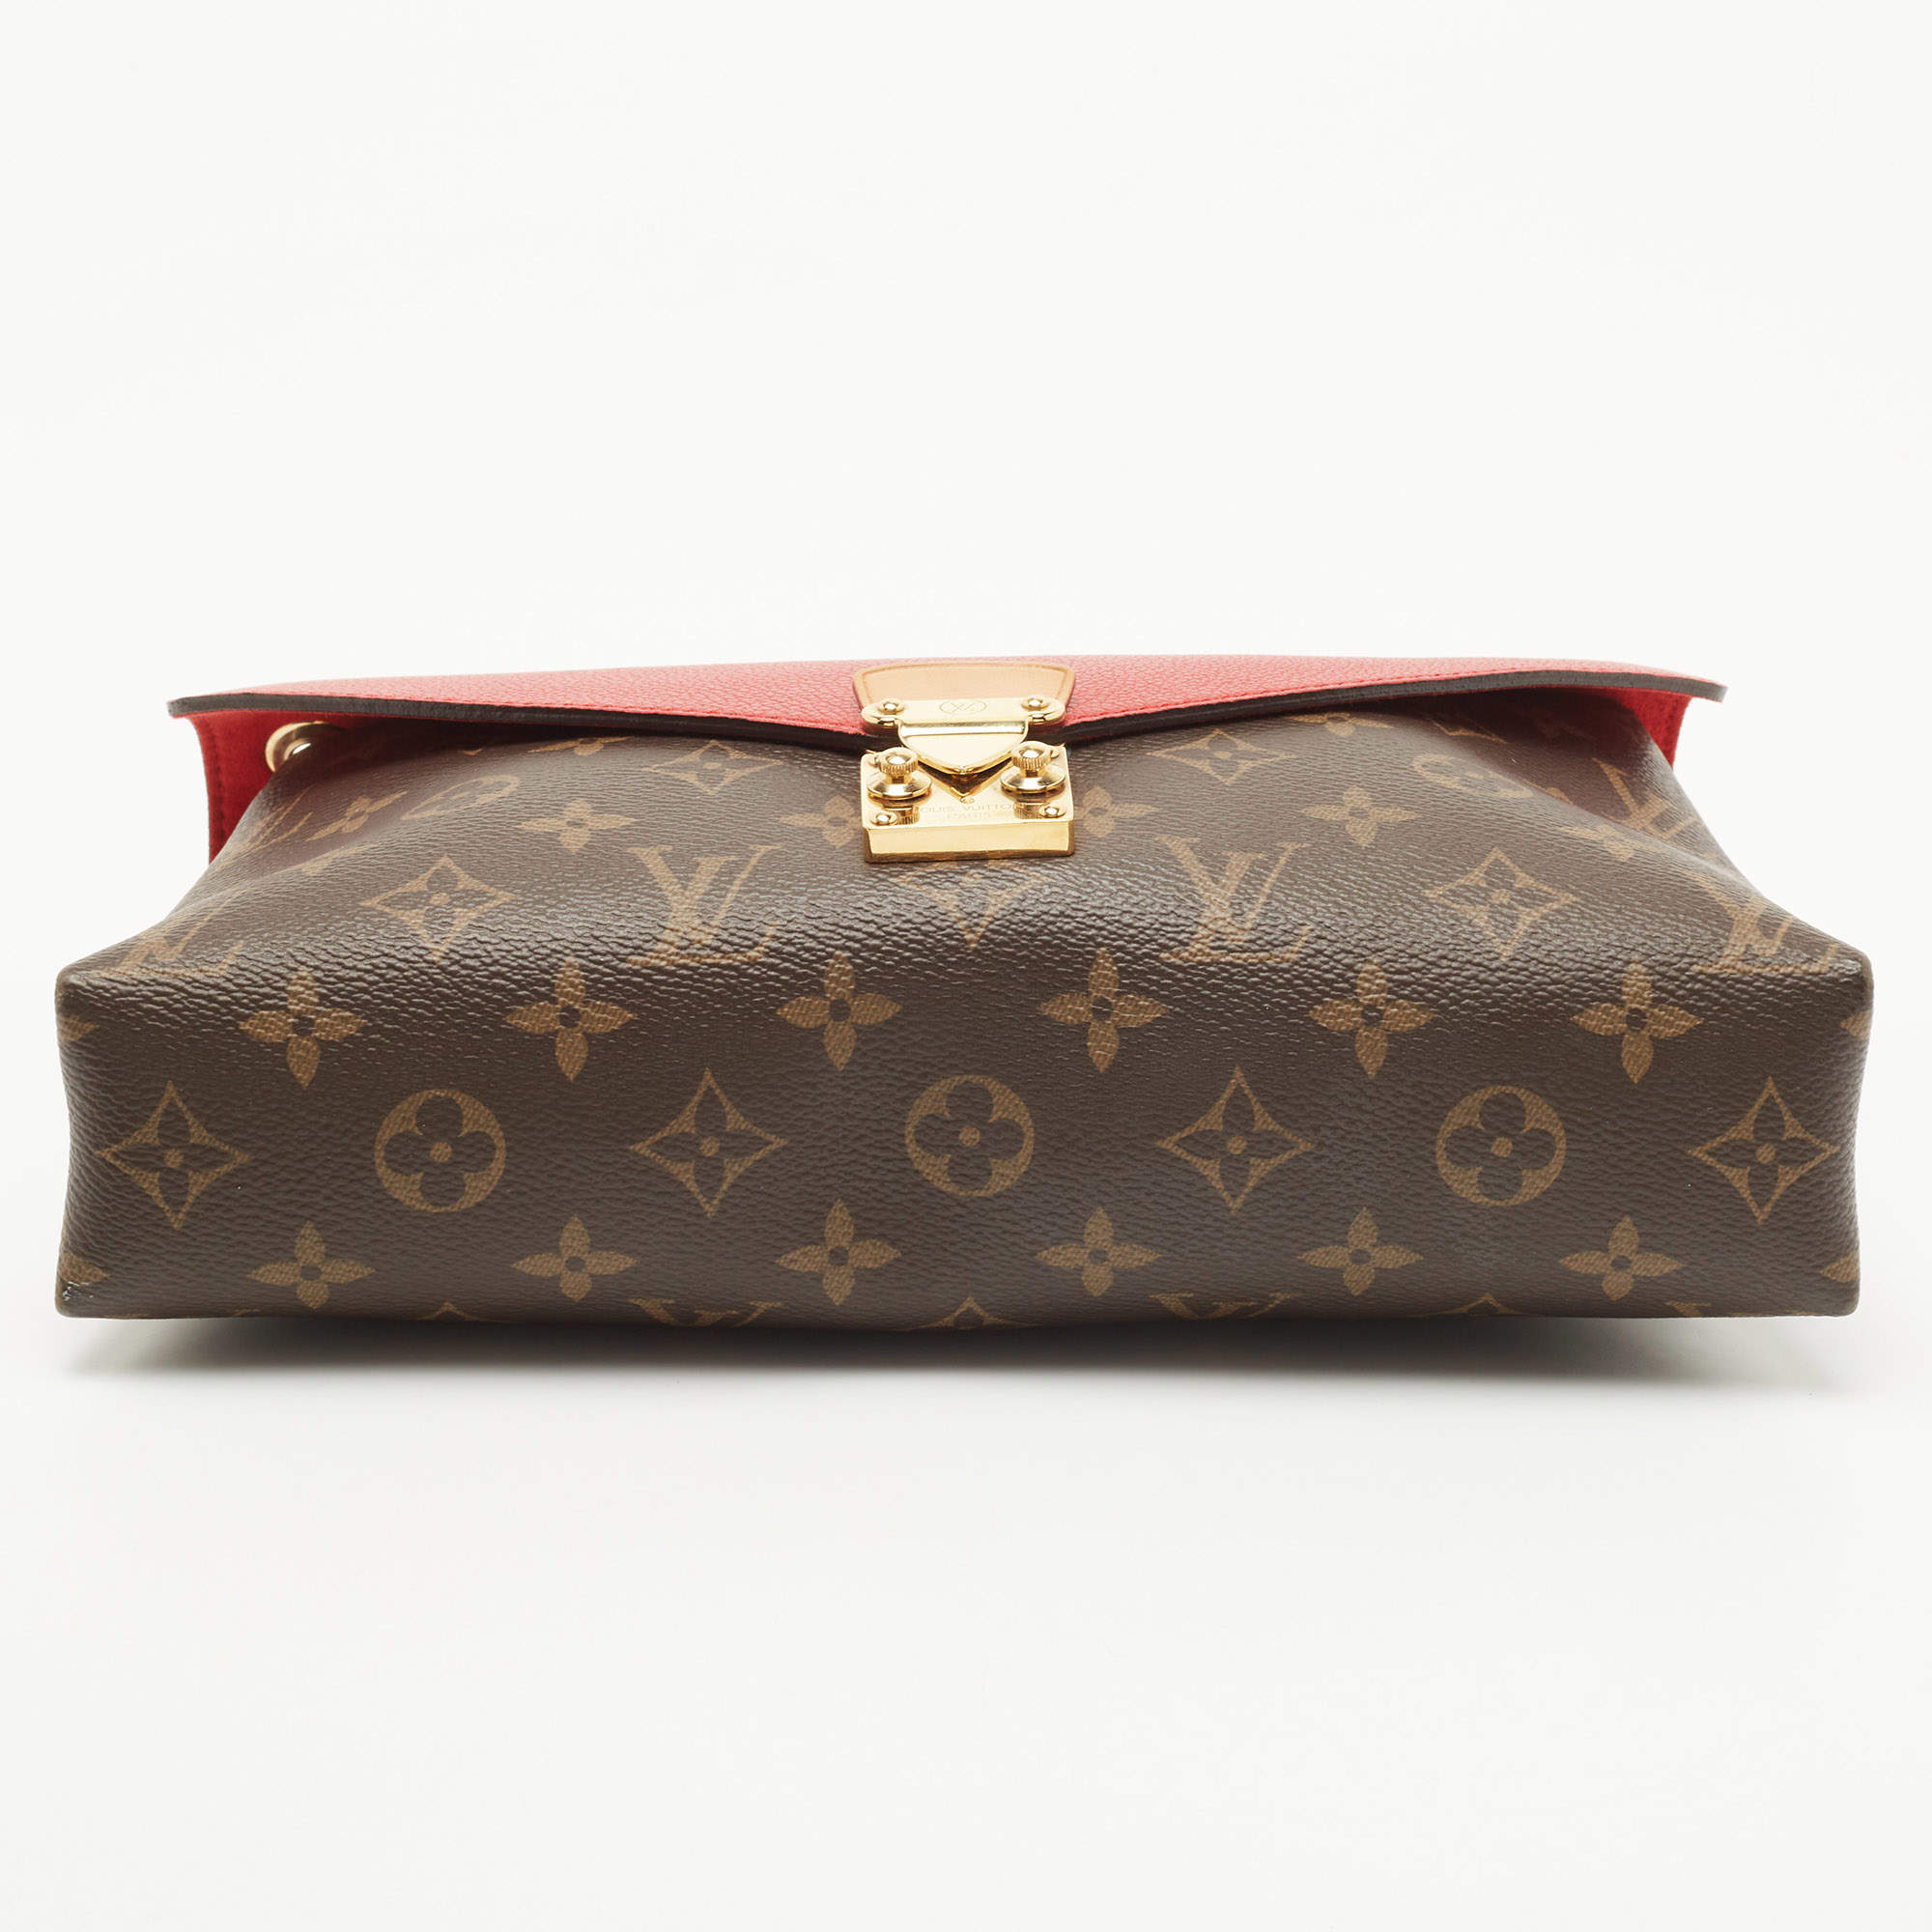 Louis Vuitton Cherry Monogram Canvas Pallas Chain Bag - Handbag | Pre-owned & Certified | used Second Hand | Unisex